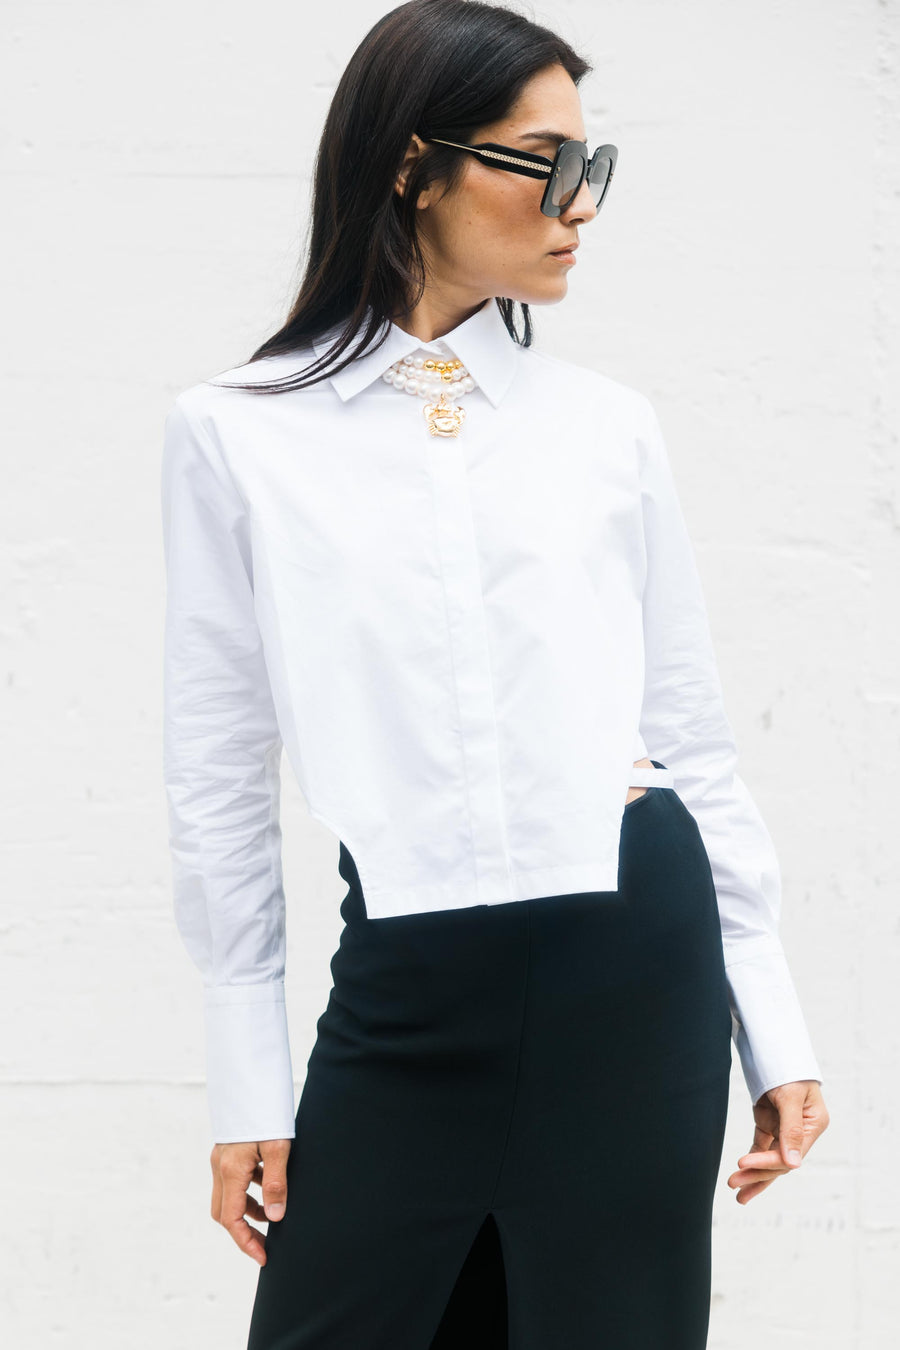 Cropped Link Blouse in White